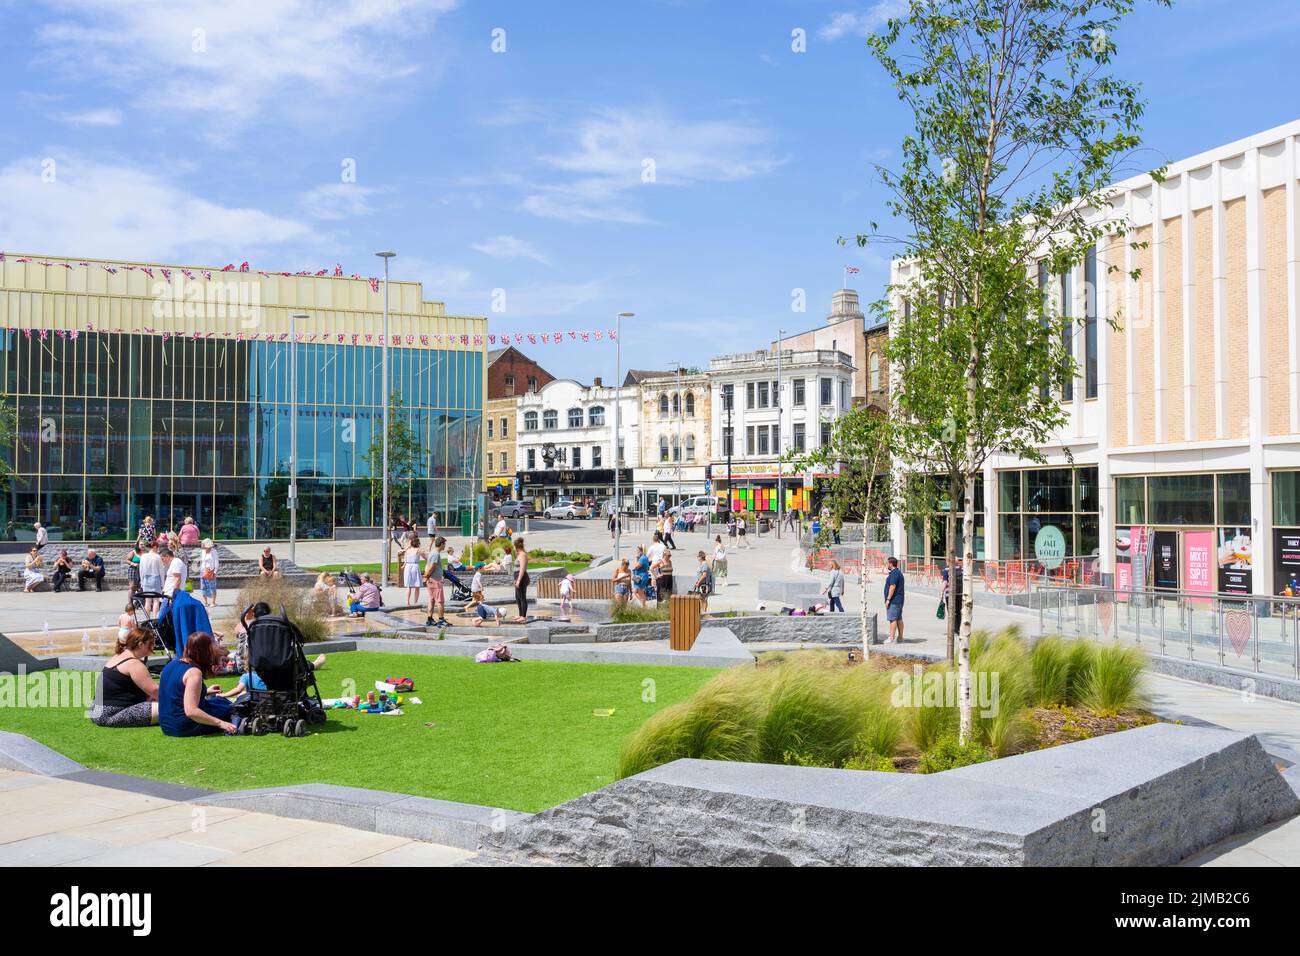 Barnsley Library or The Lightbox People enjoying the sun in Glass Work's square Barnsley South Yorkshire West Riding of Yorkshire England UK GB Europe Stock Photo